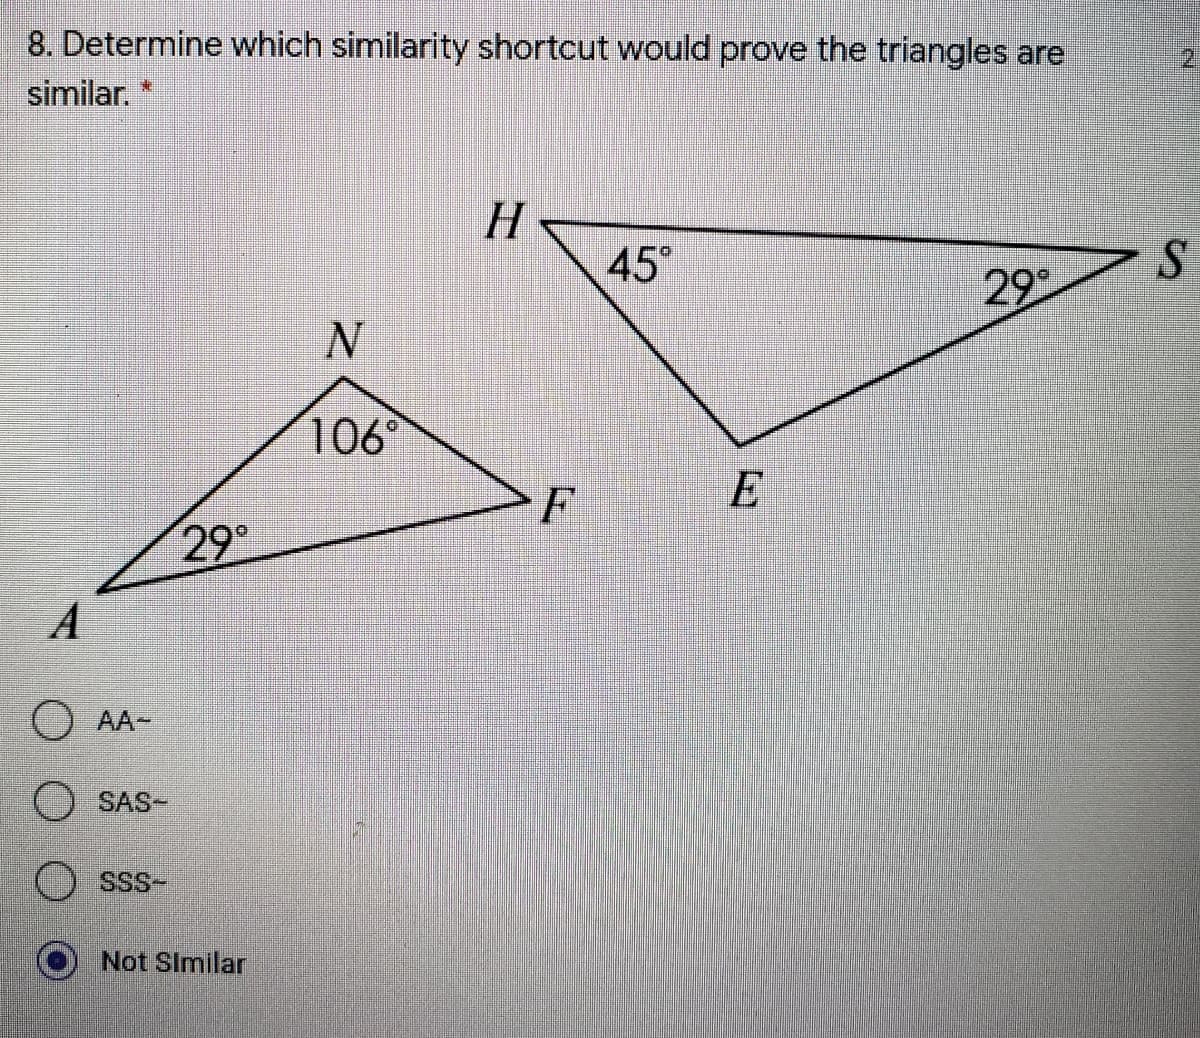 8. Determine which similarity shortcut would prove the triangles are
2.
similar.
H.
45
29
106
F
E
29°
A
O AA-
O SAS-
SSS-
Not SImilar
